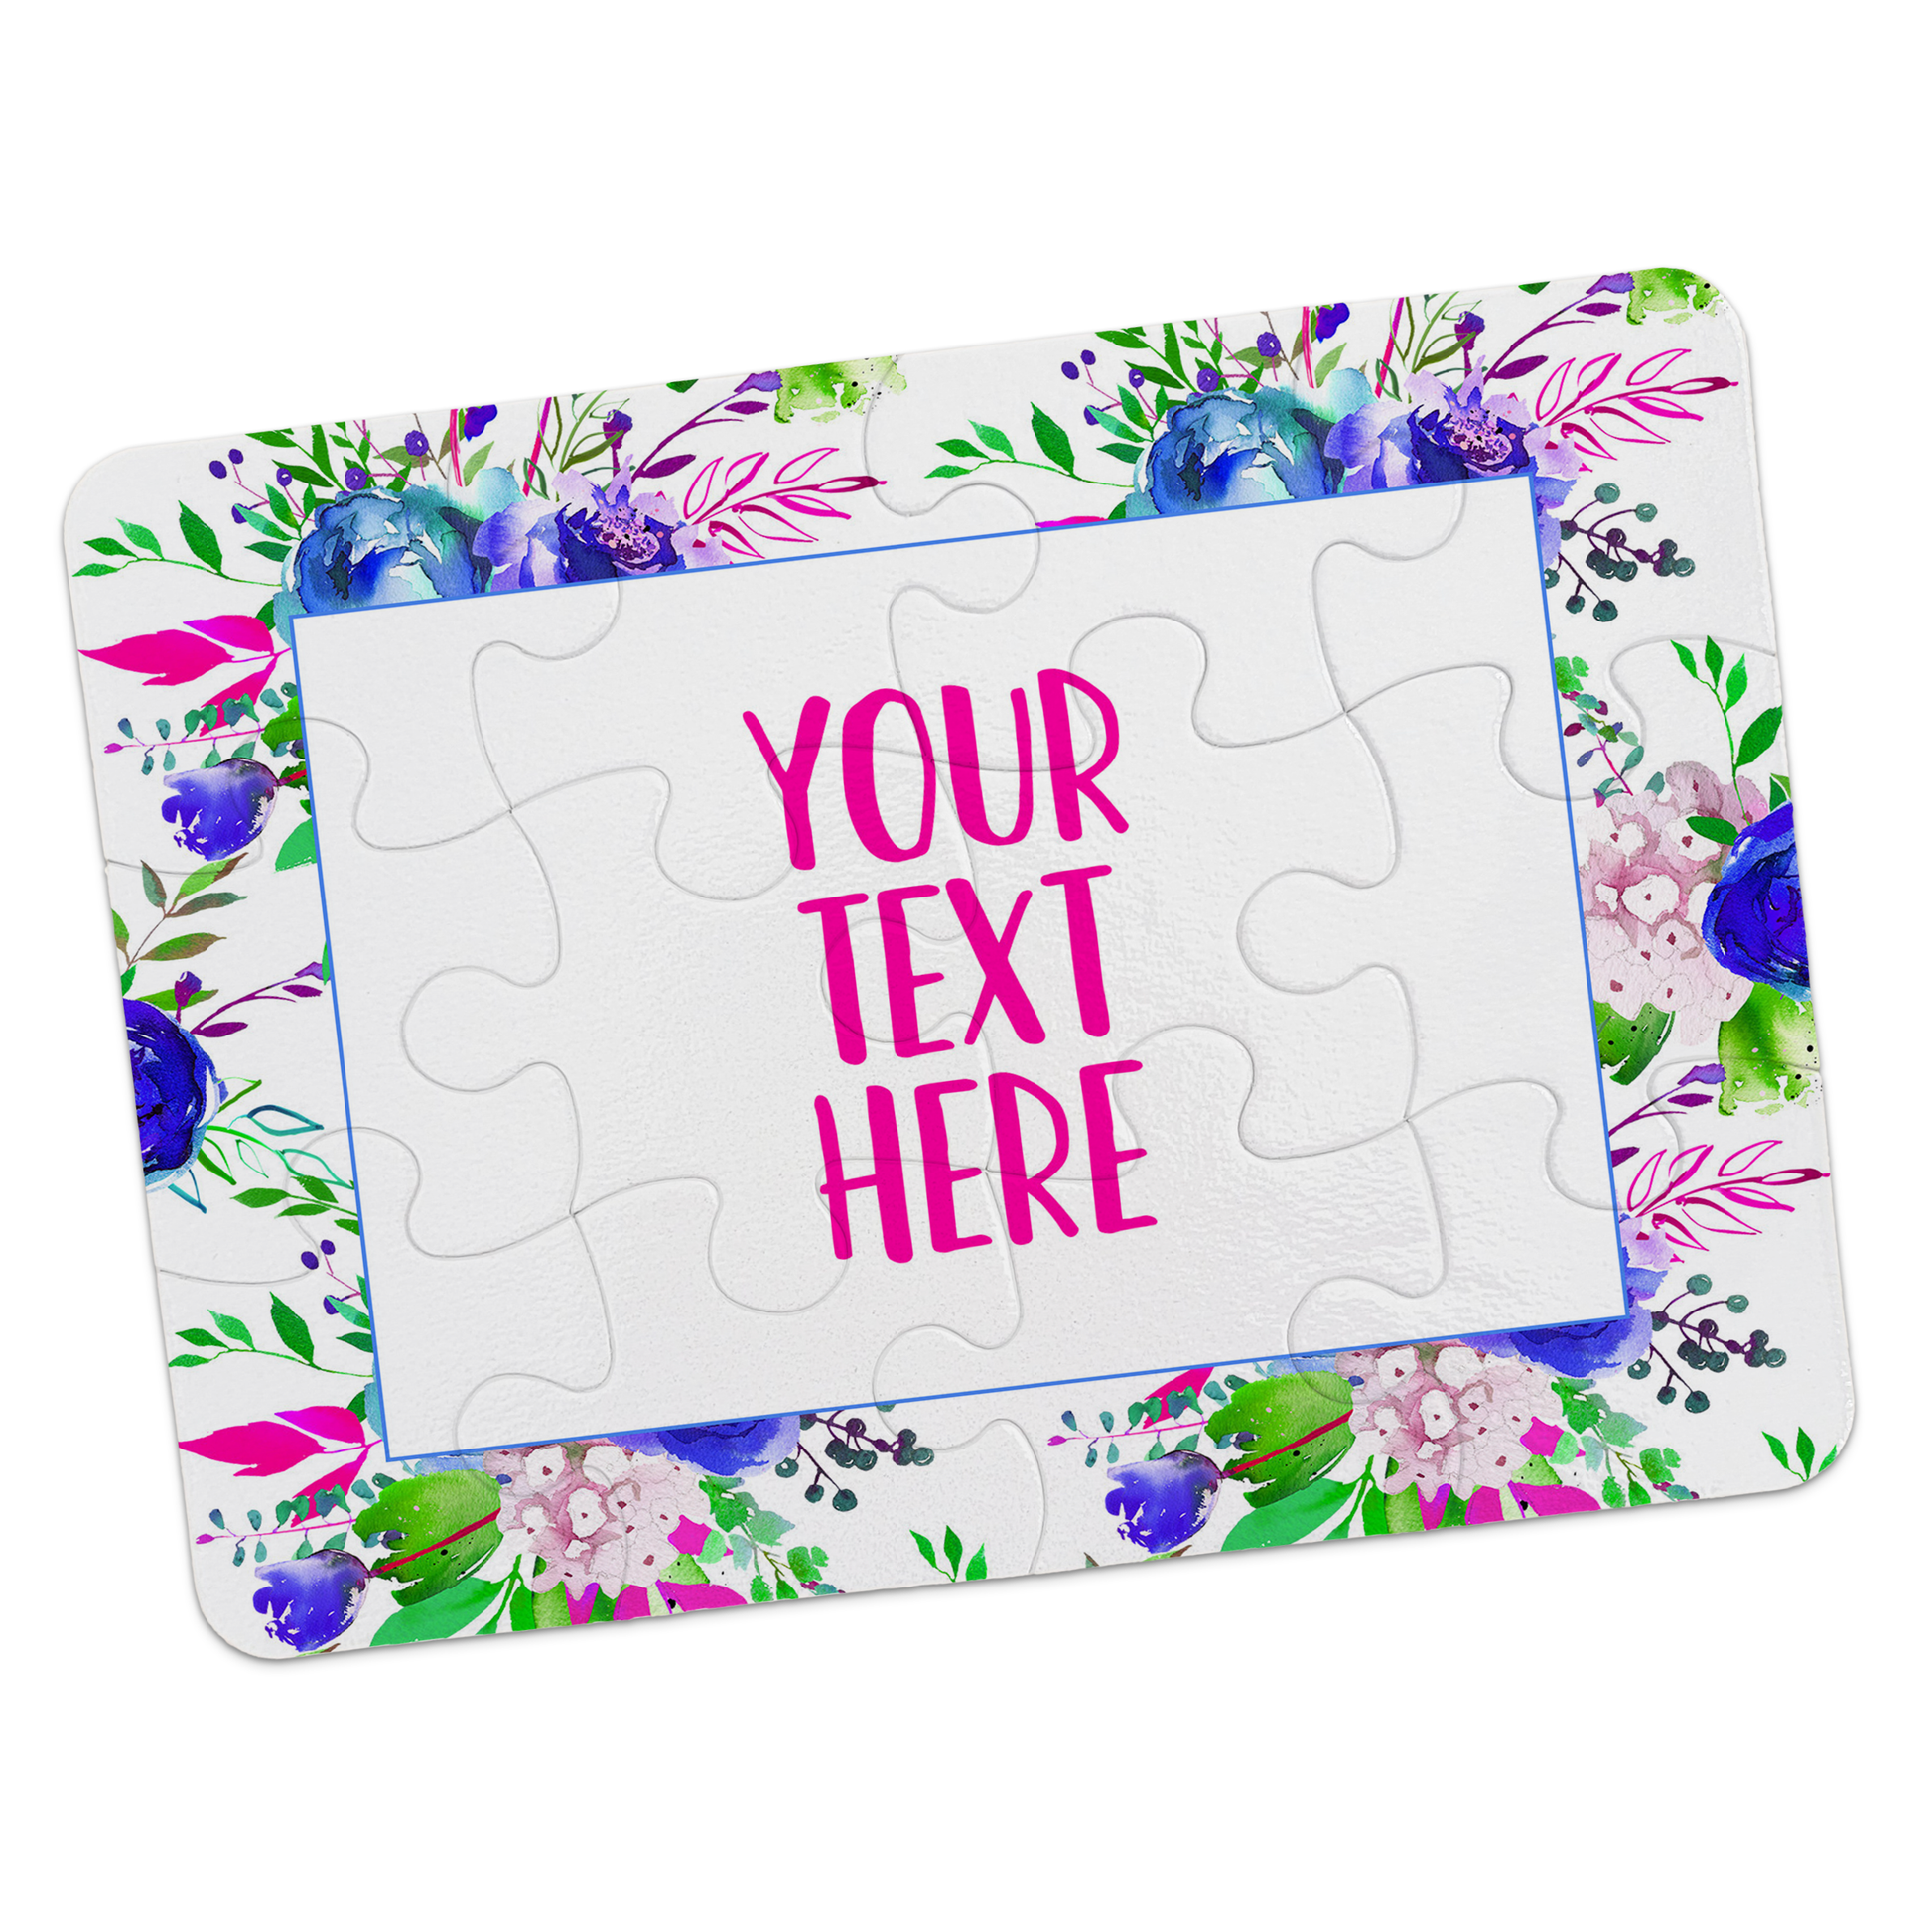 Create Your Own Puzzle - Floral Design - CYOP0068